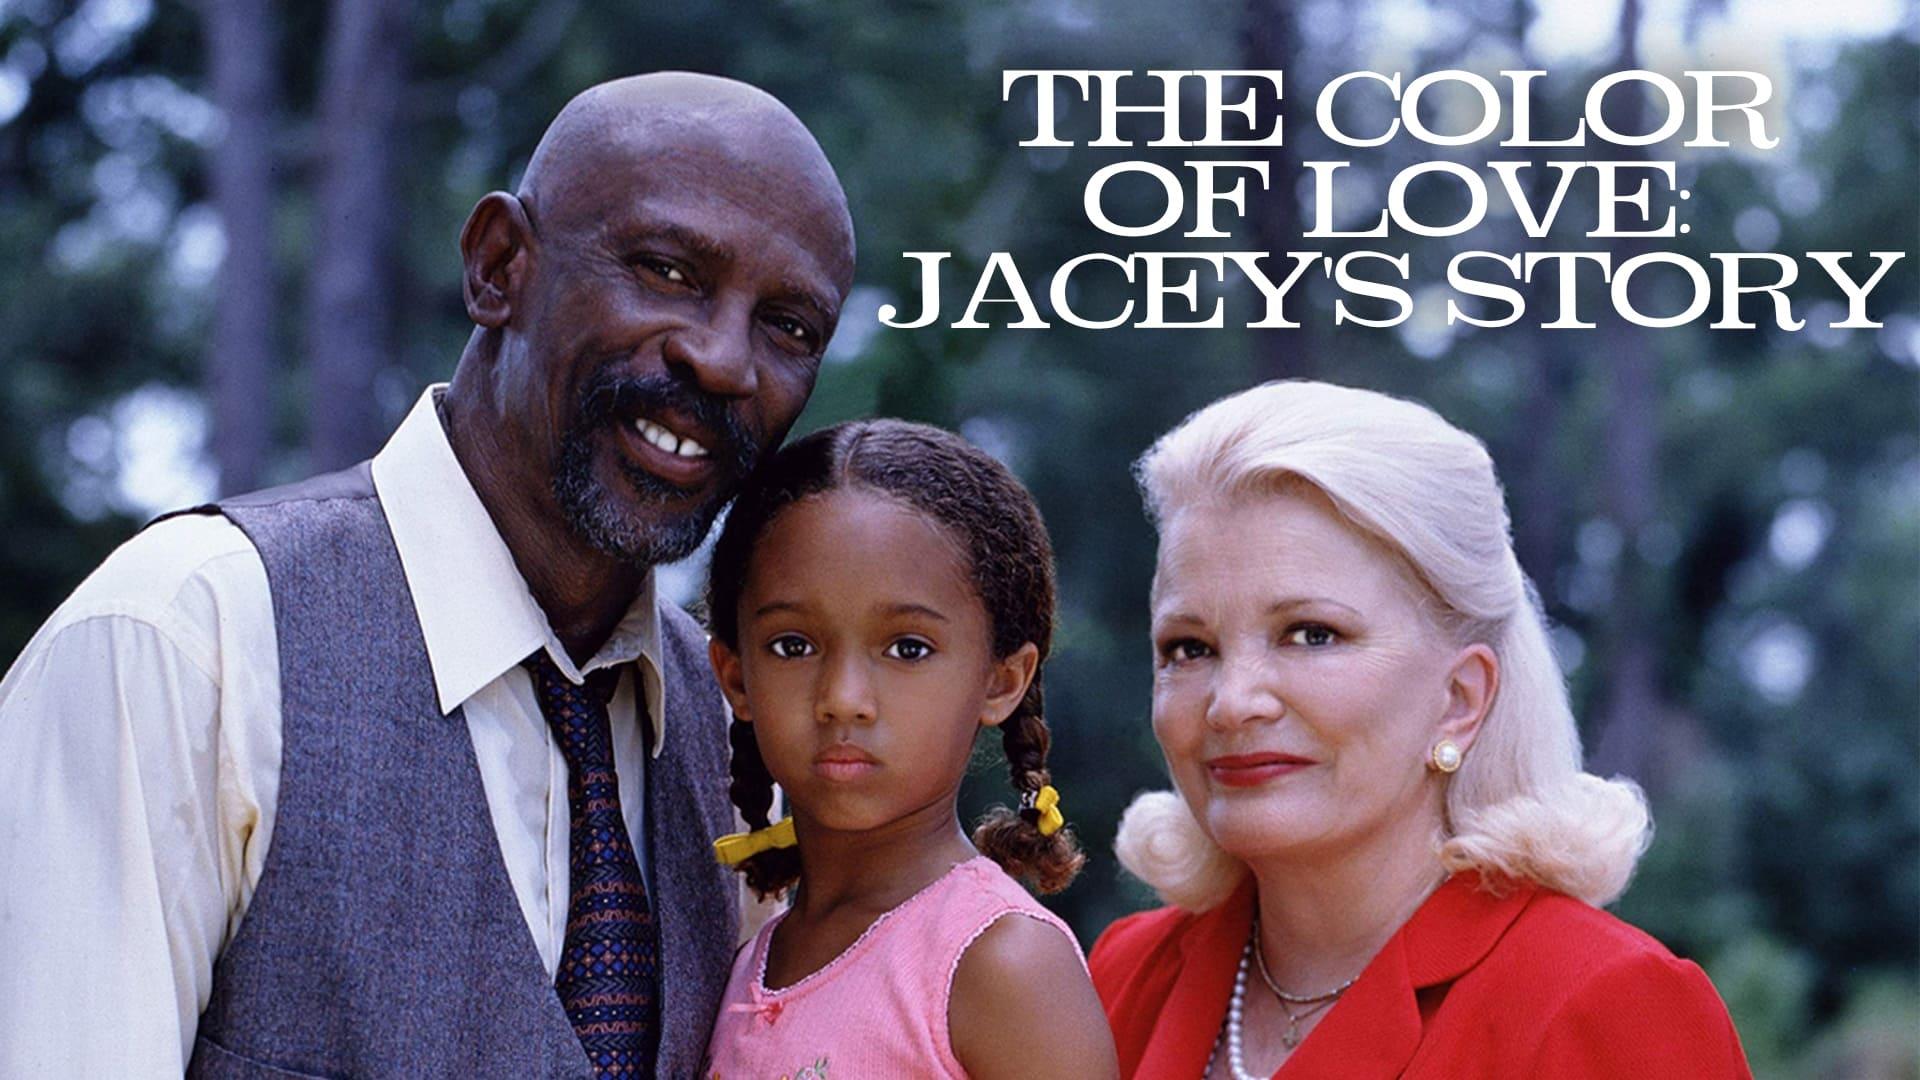 The Color of Love: Jacey's Story backdrop